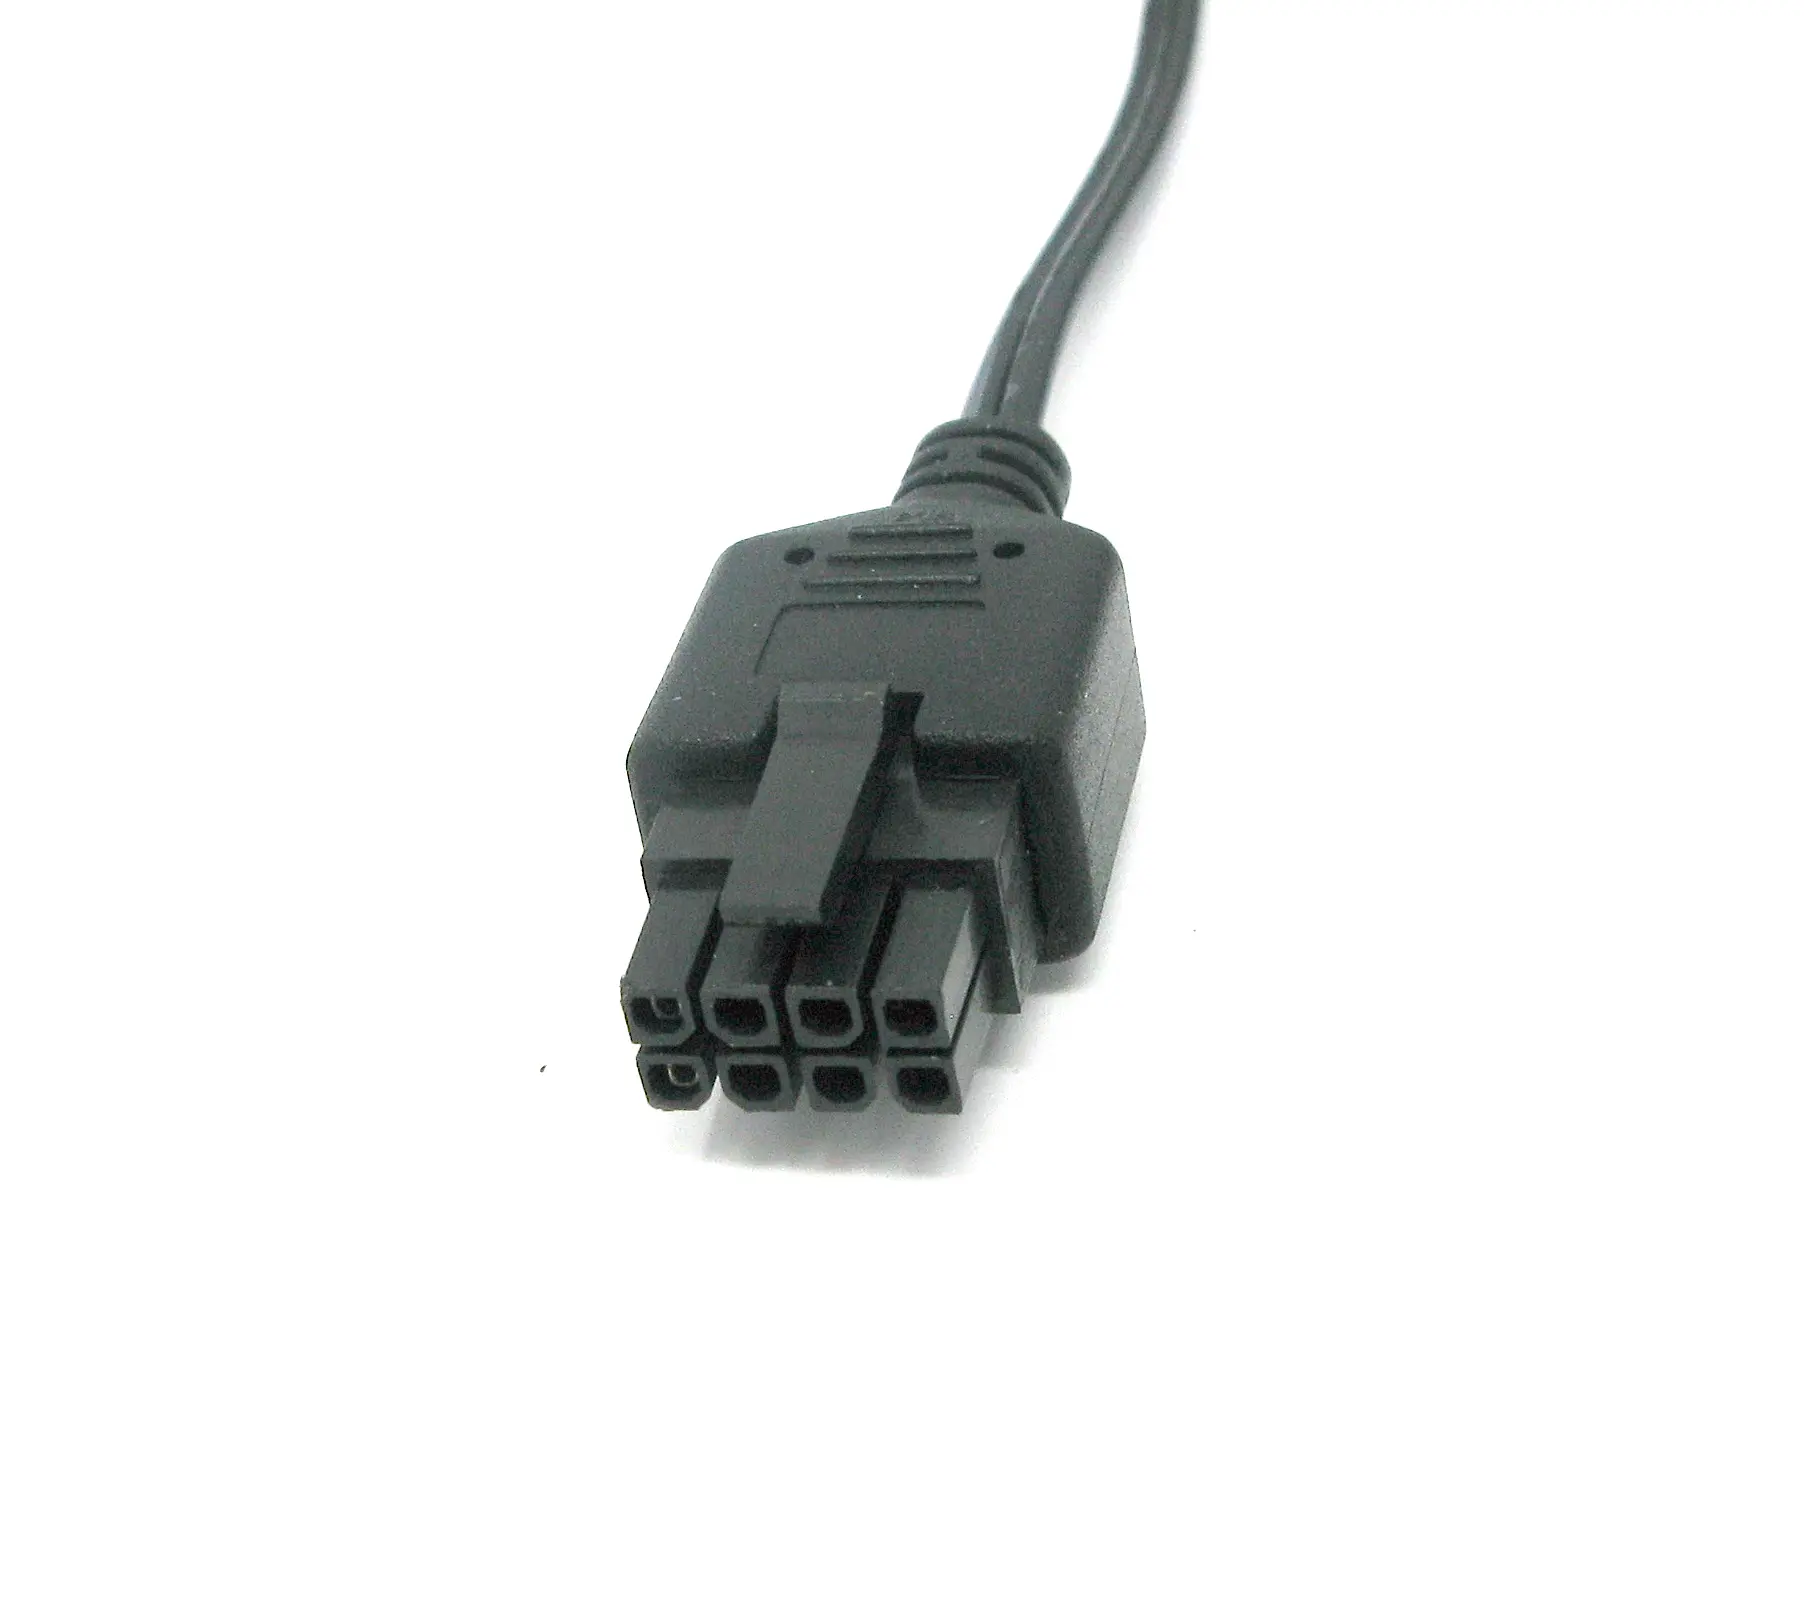 GlobTek offers over-molded versions of Molex 43025-0800 Micro-fit 3.0 (8) circuit connector housing Micro-Fit 3.0, Dual Row, 8 Circuits, UL 94V-0, Low-Halogen, Black for various types of cables and applications, MOL8/C0677